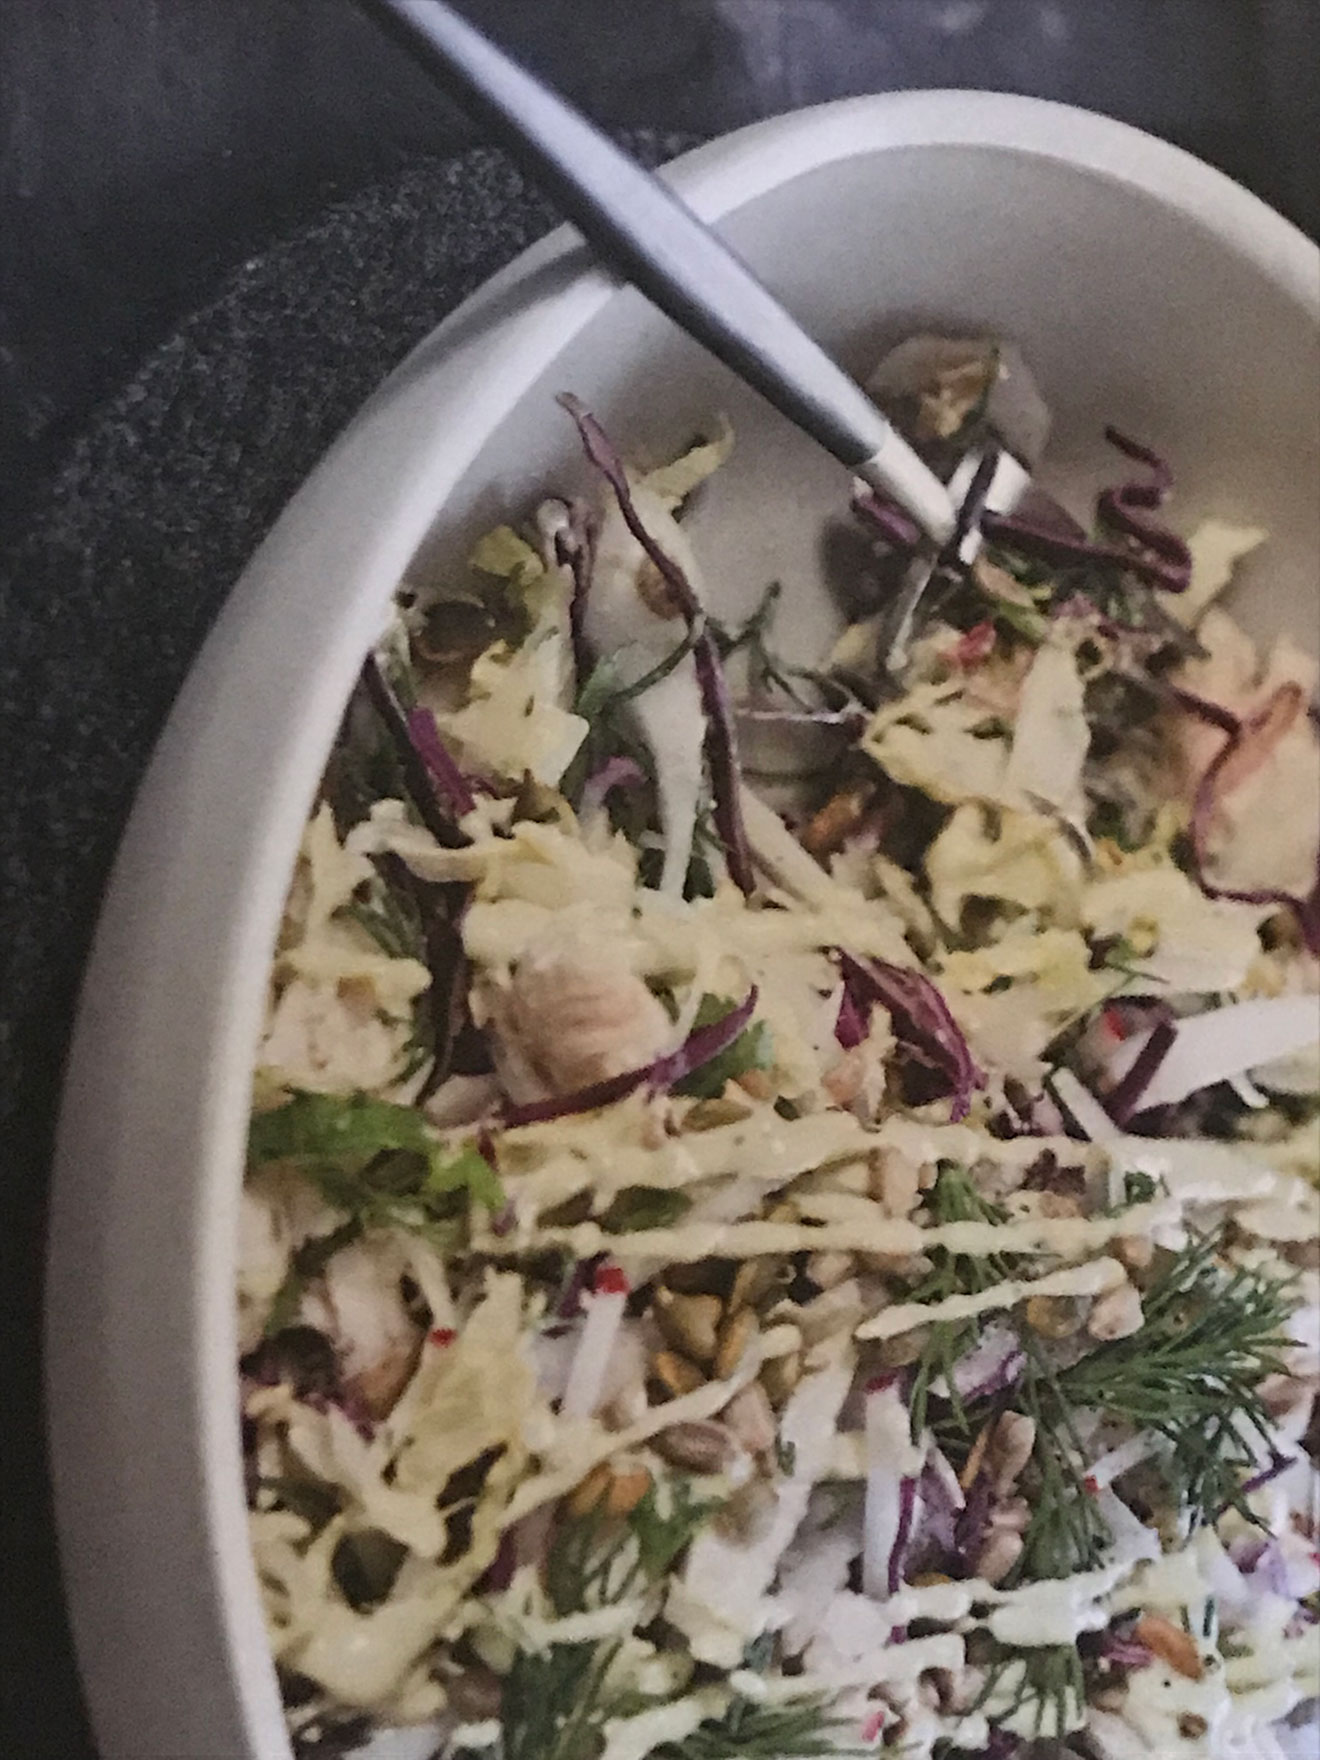 chicken and coleslaw recipe